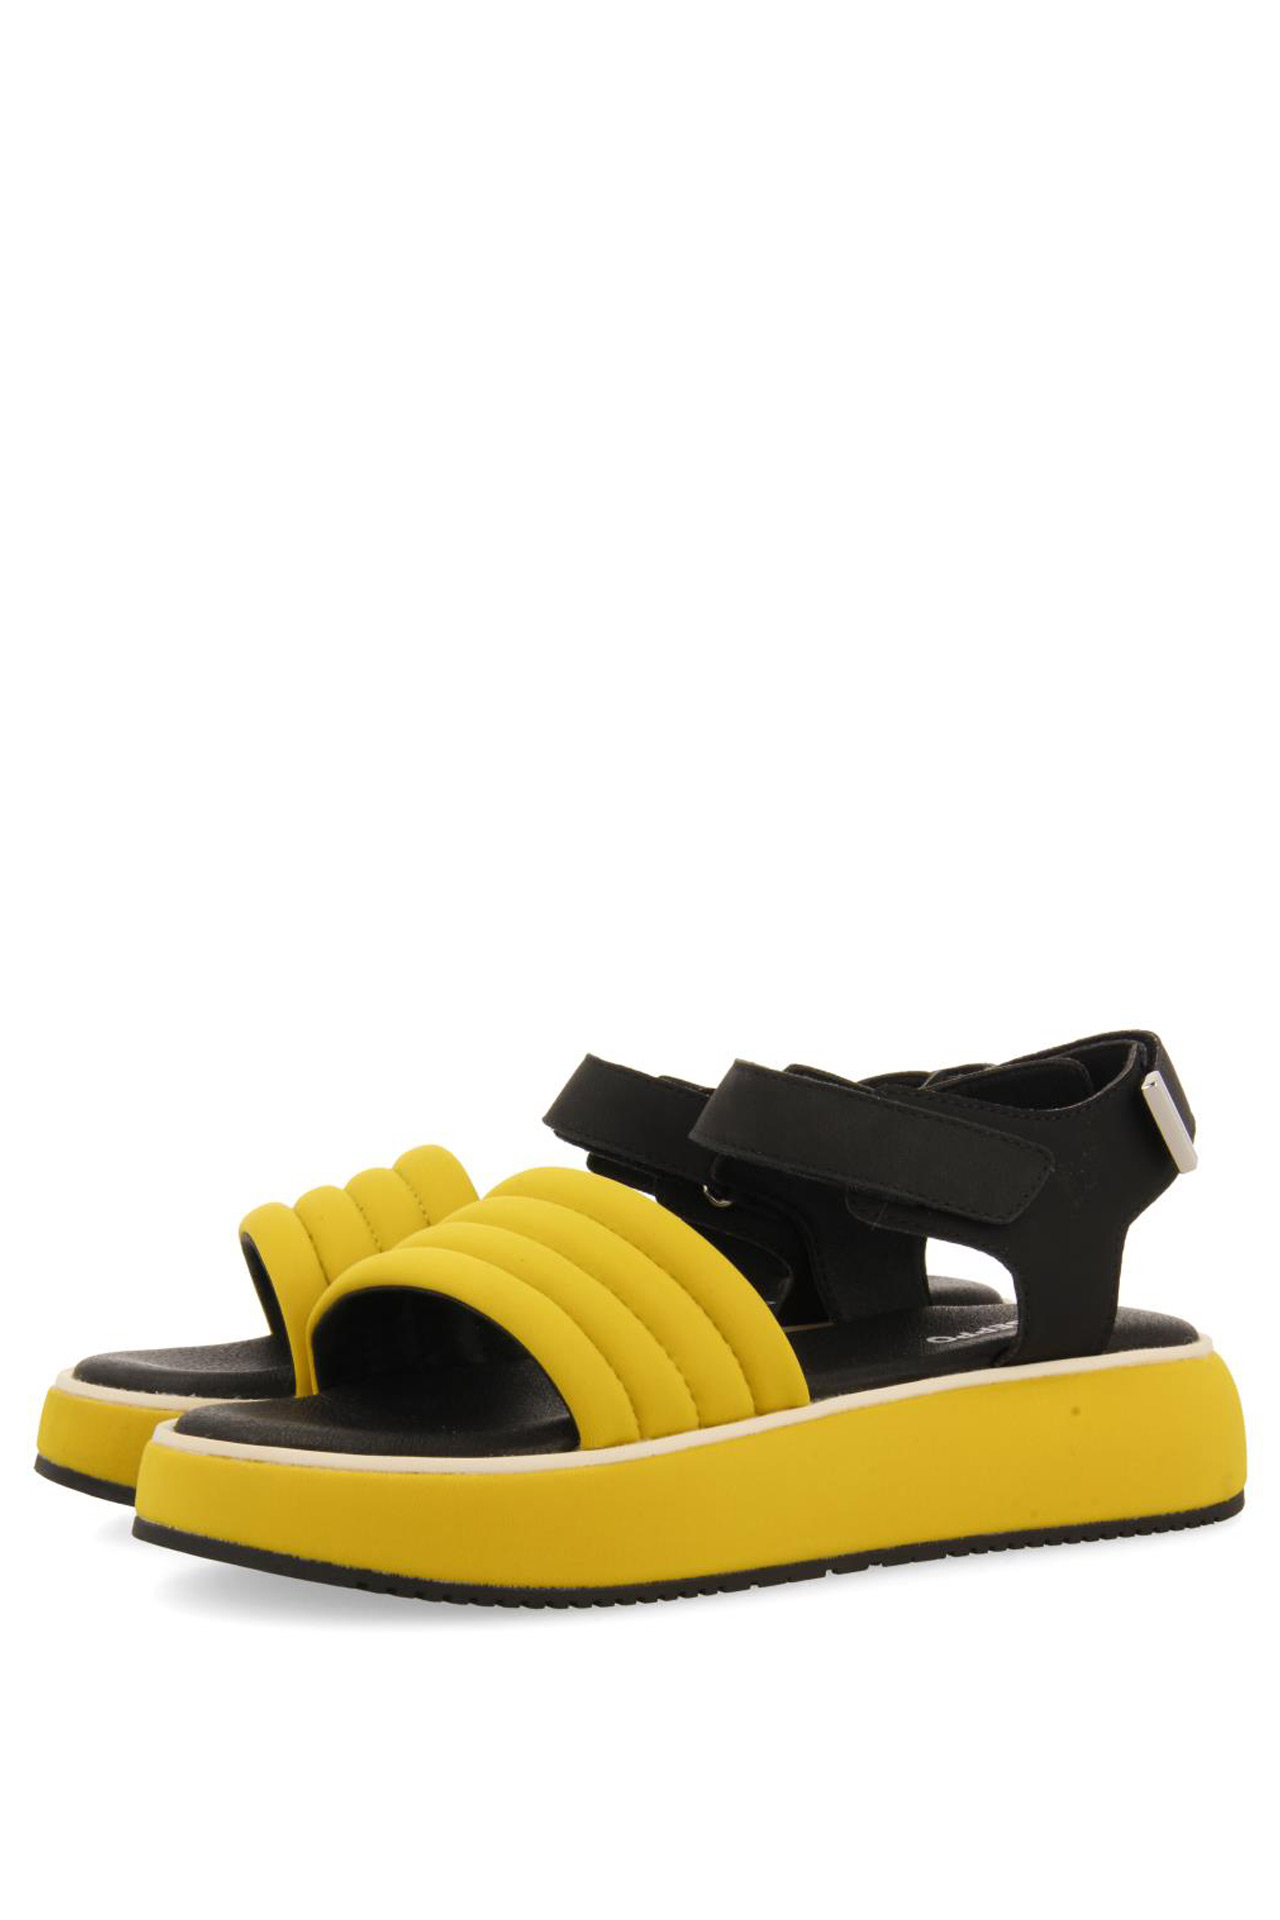 GIOSEPPO CHEVAL MUSTARD SPORTS SANDALS WITH PLATFORM